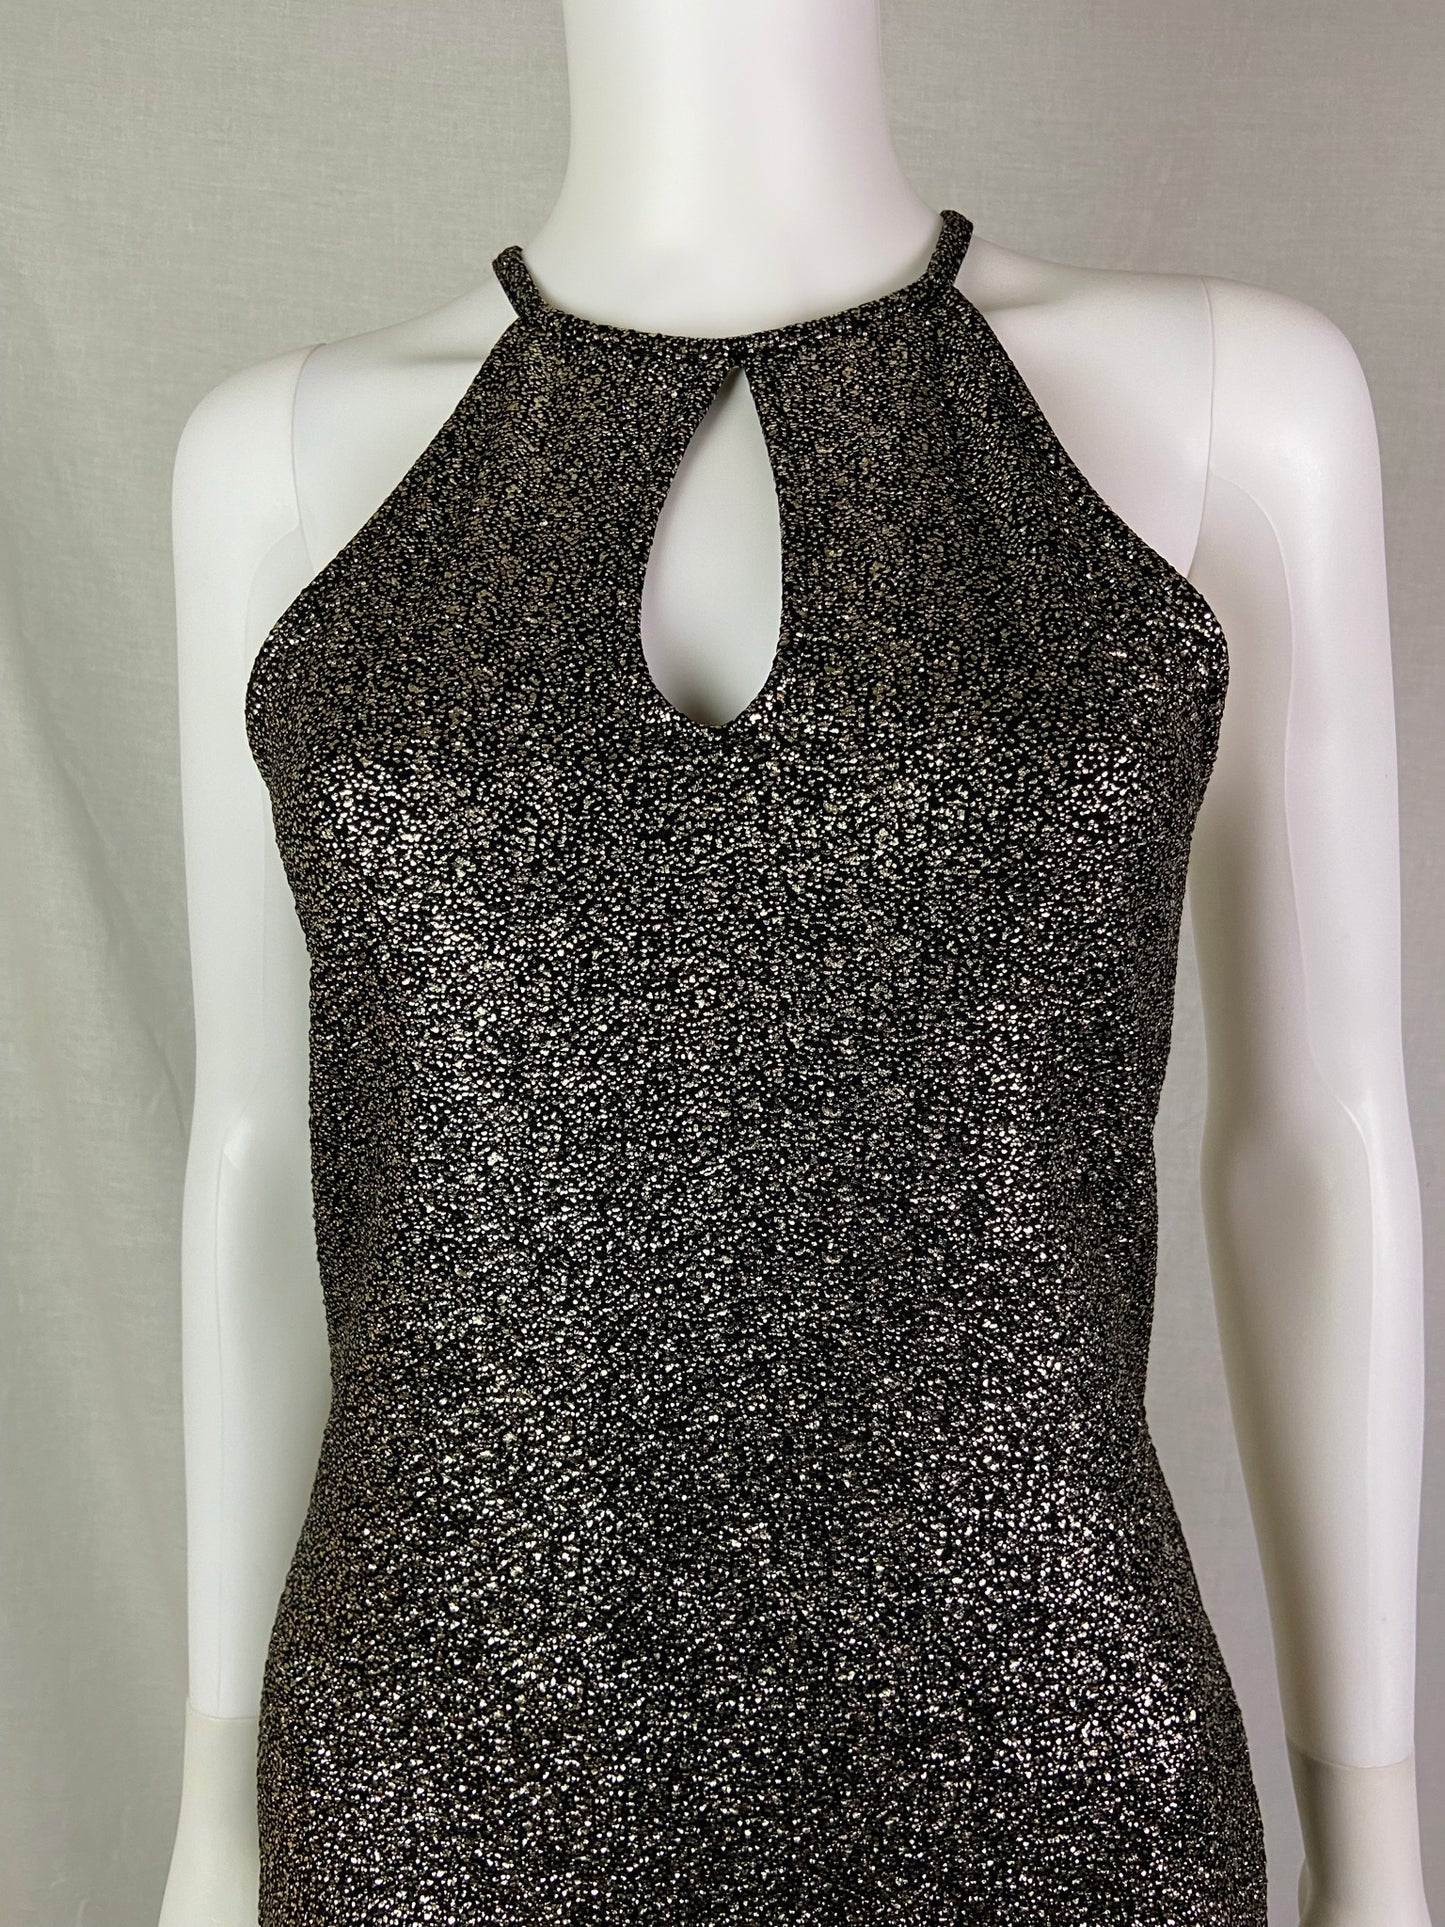 One Clothing Gold Silver Pewter Black Foil Stretch Cocktail Dress